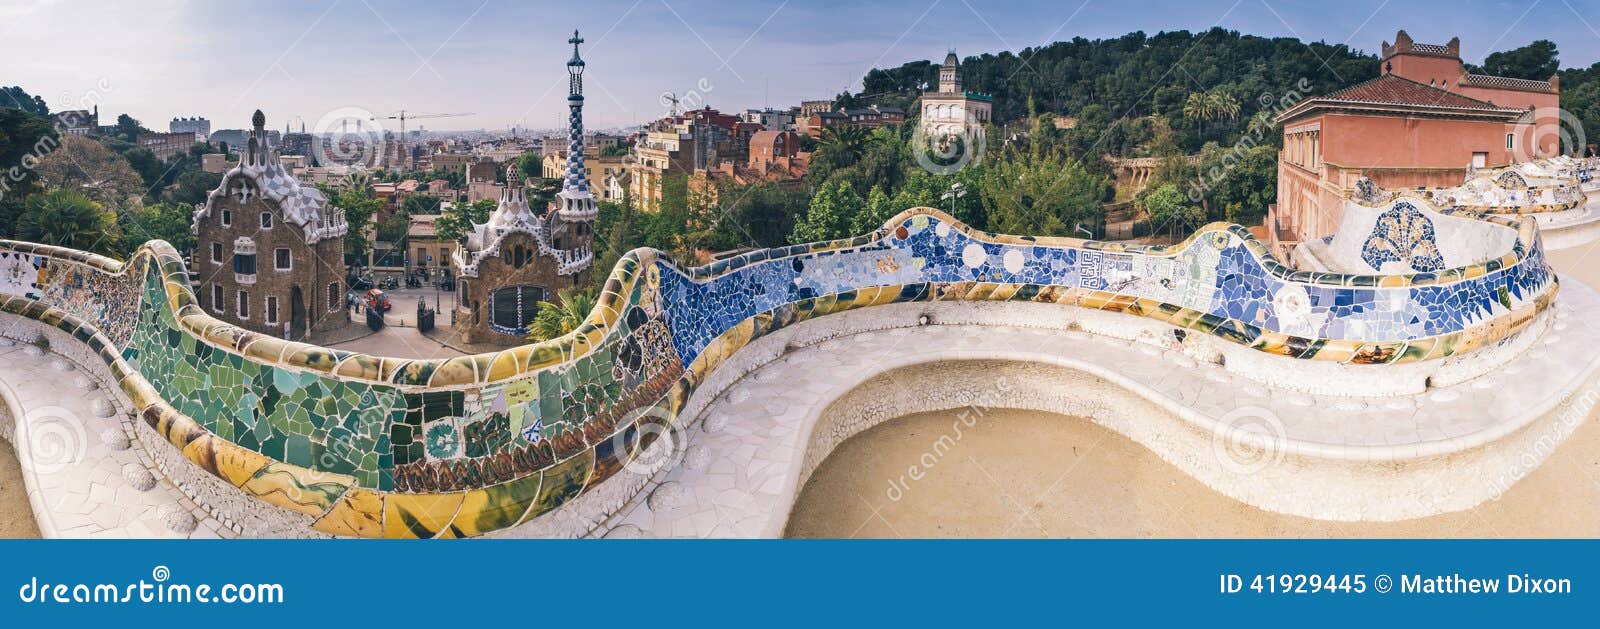 parc guell, barcelona